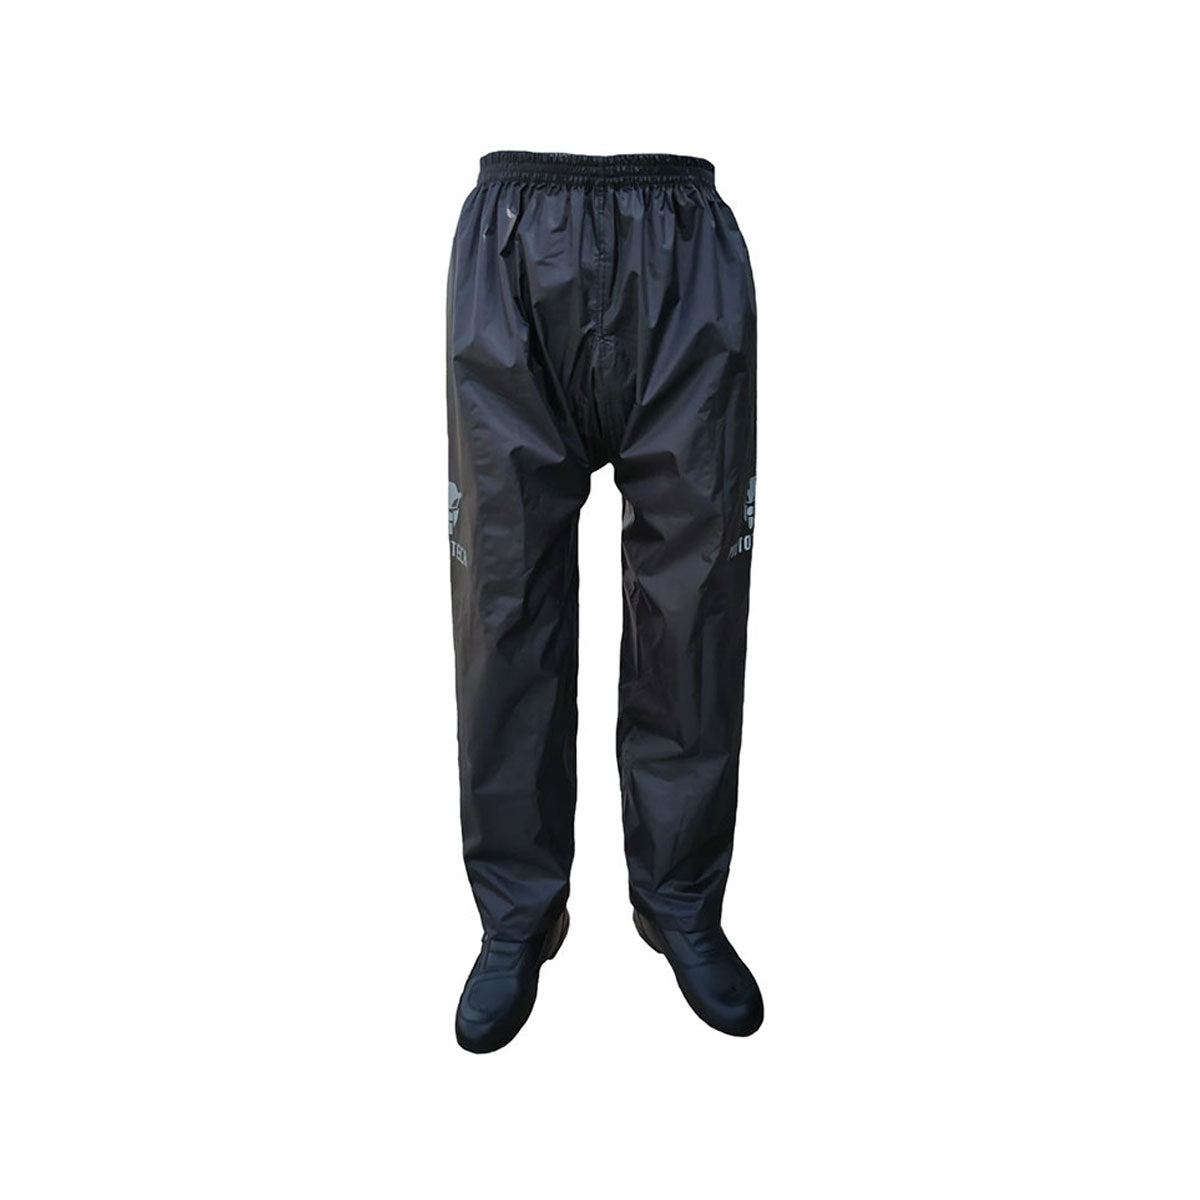 Waterproof Riding Trousers  Stay warm and dry  Just Chaps